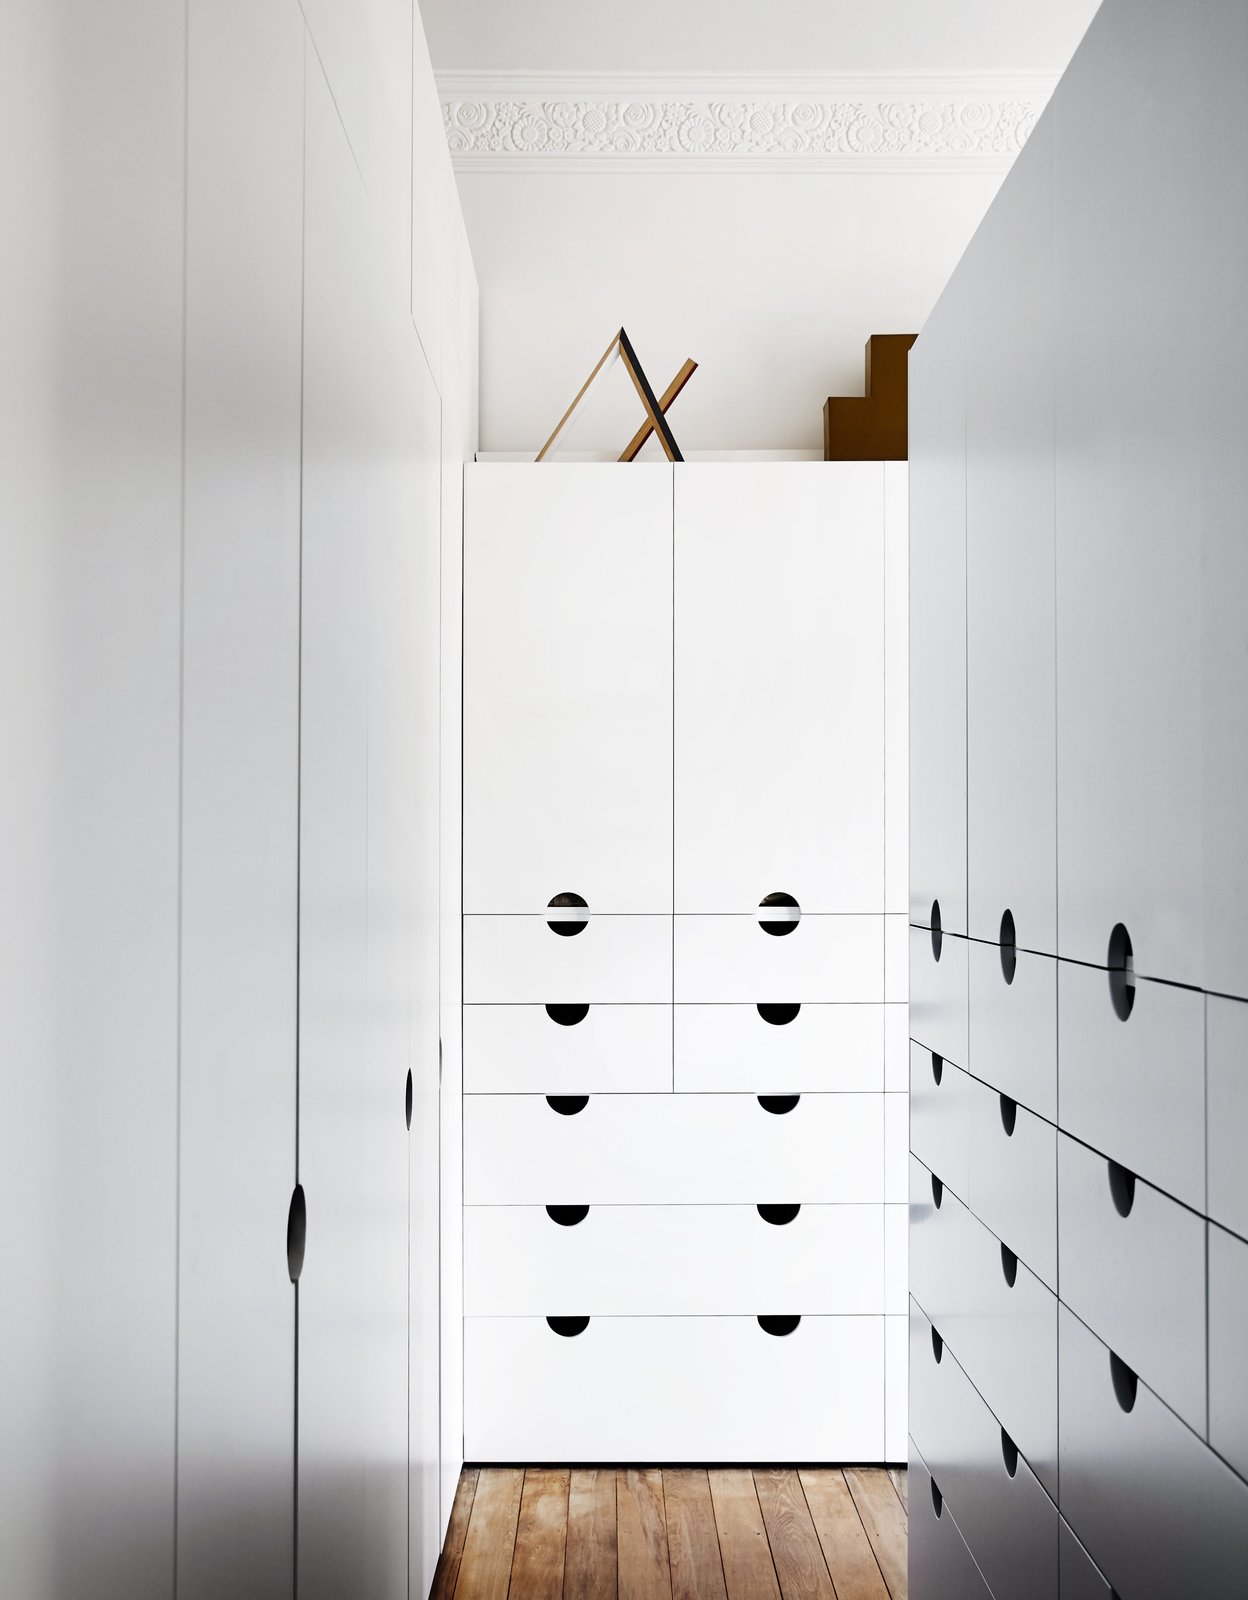 These cabinets are white and very comfy, there are no handles, only holes, and they are the main storage pieces